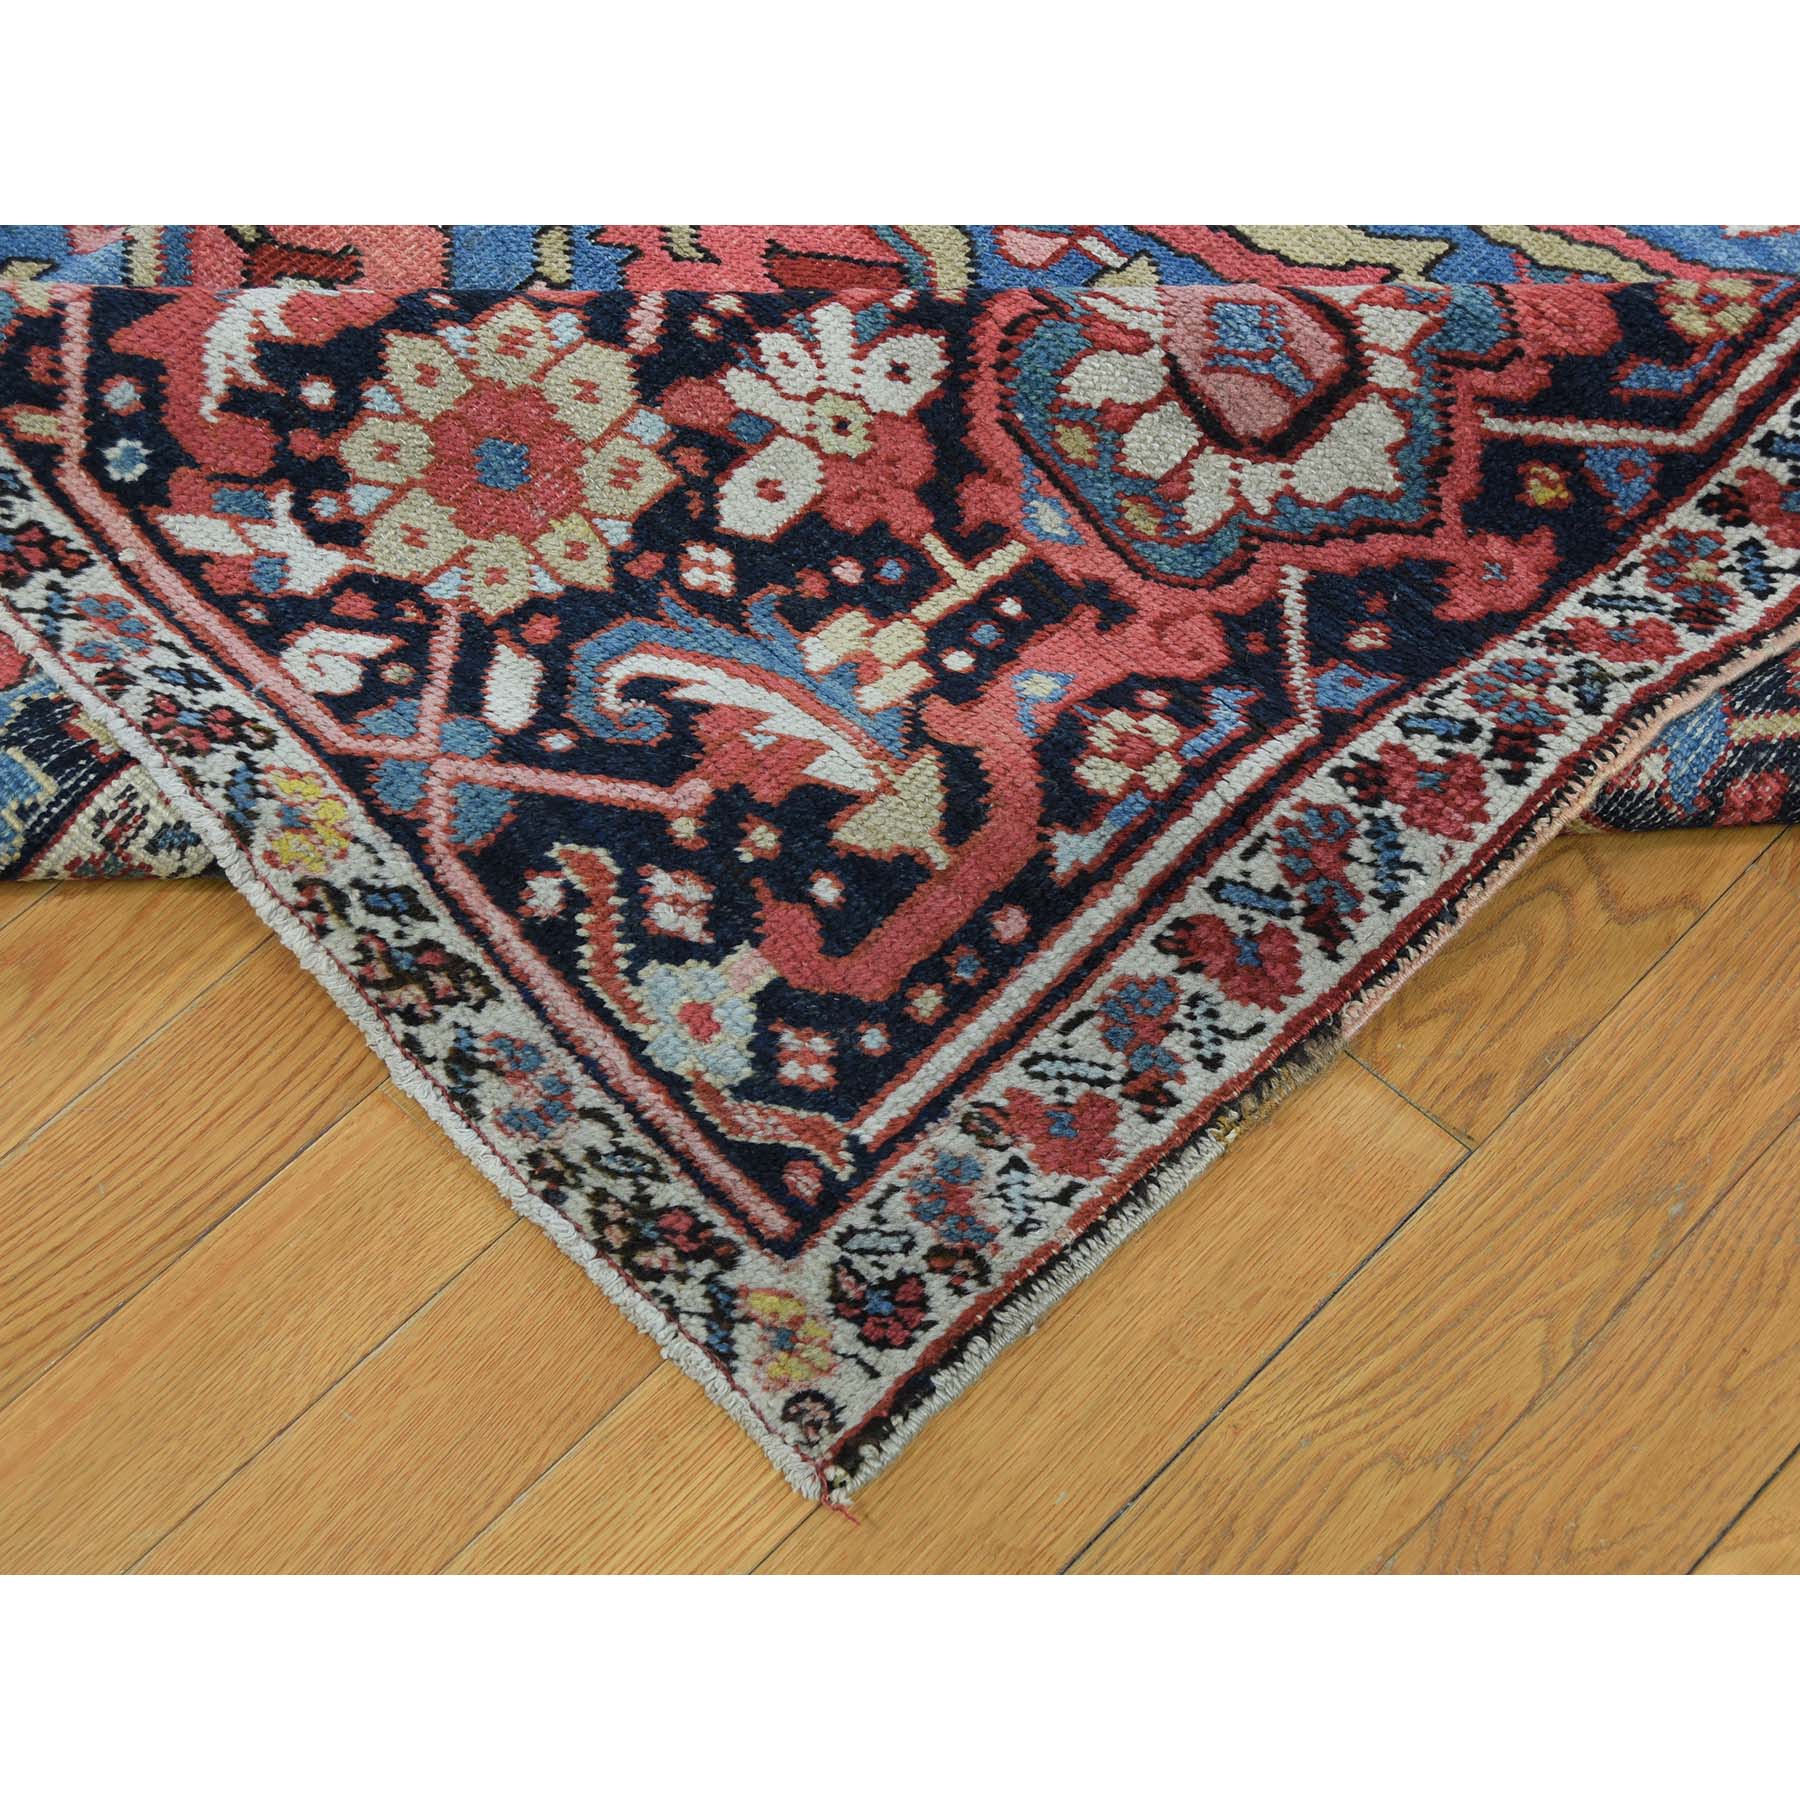 11-7 x14-9  Antique  Persian Heriz Pure Wool Exc Condition Hand-Knotted Fine Oriental Rug 